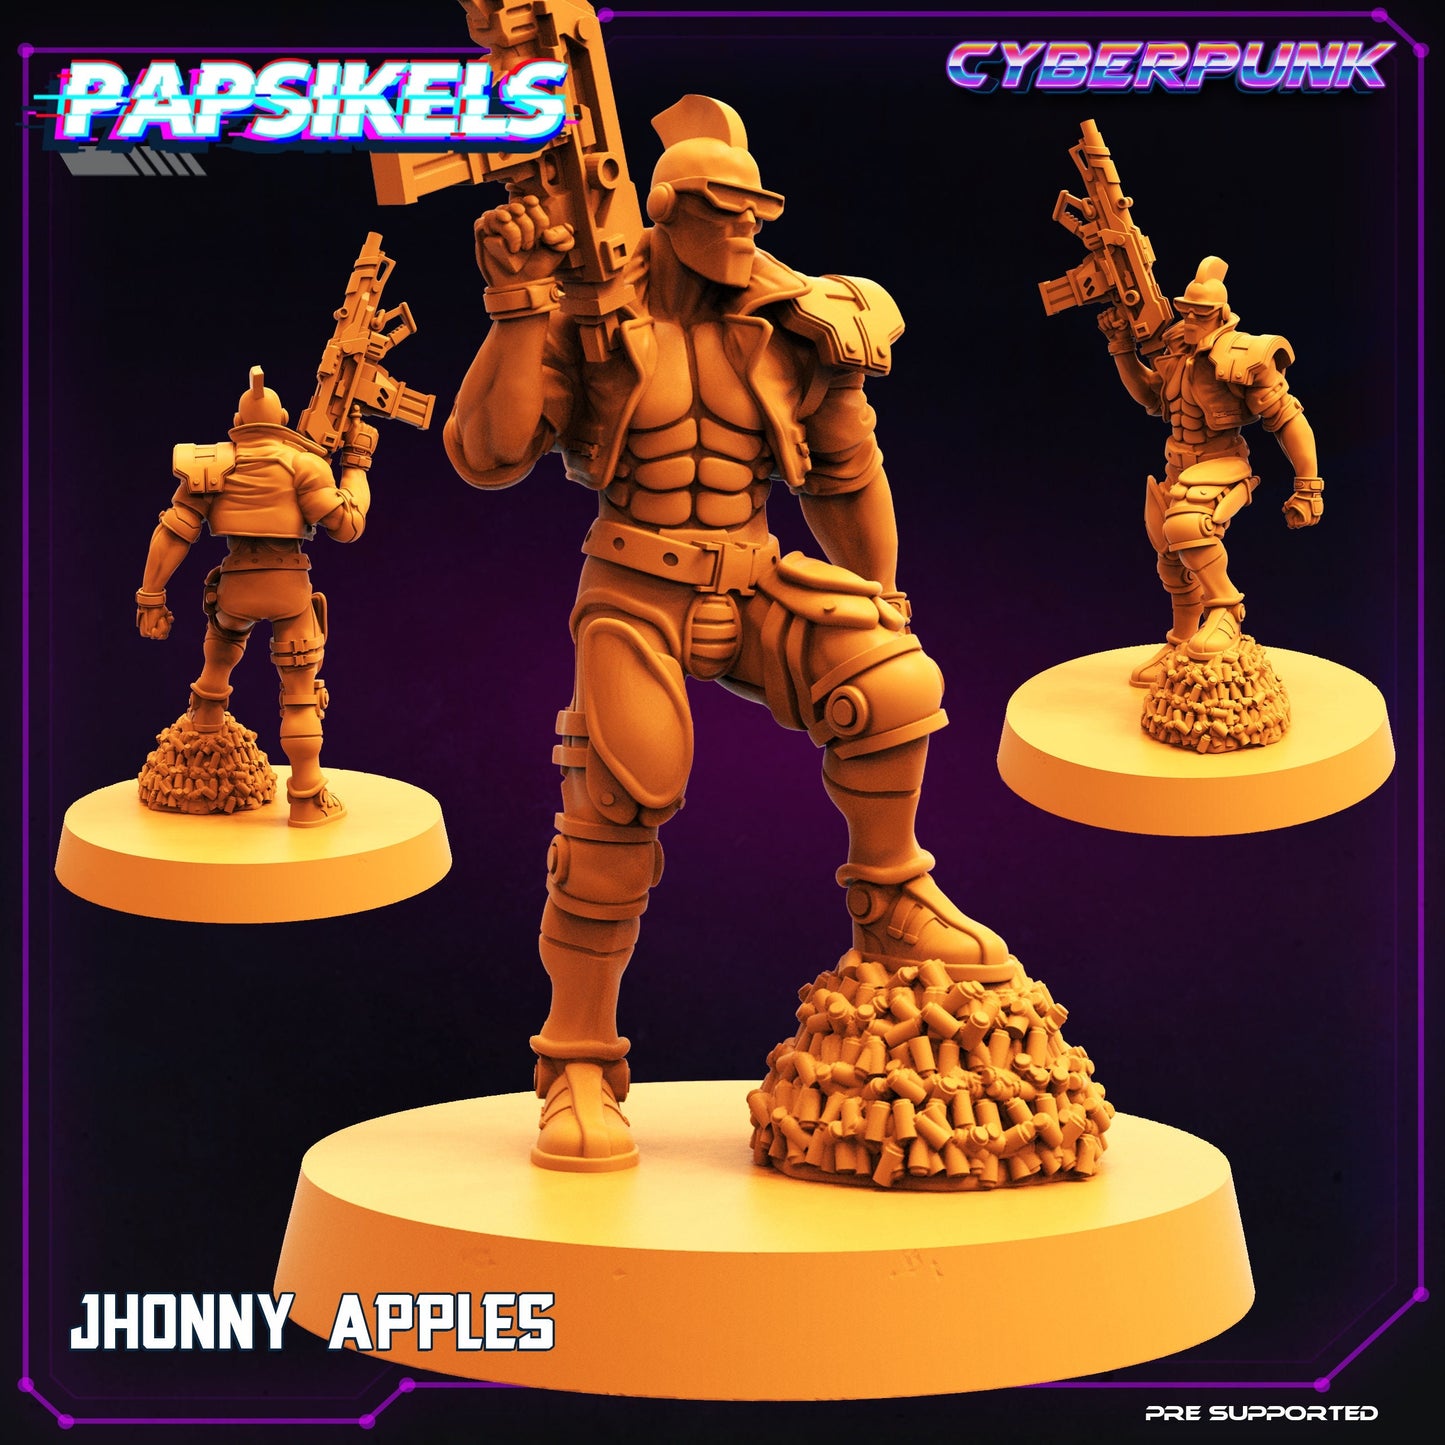 Jhonny Apples (sculpted by Papsikels)